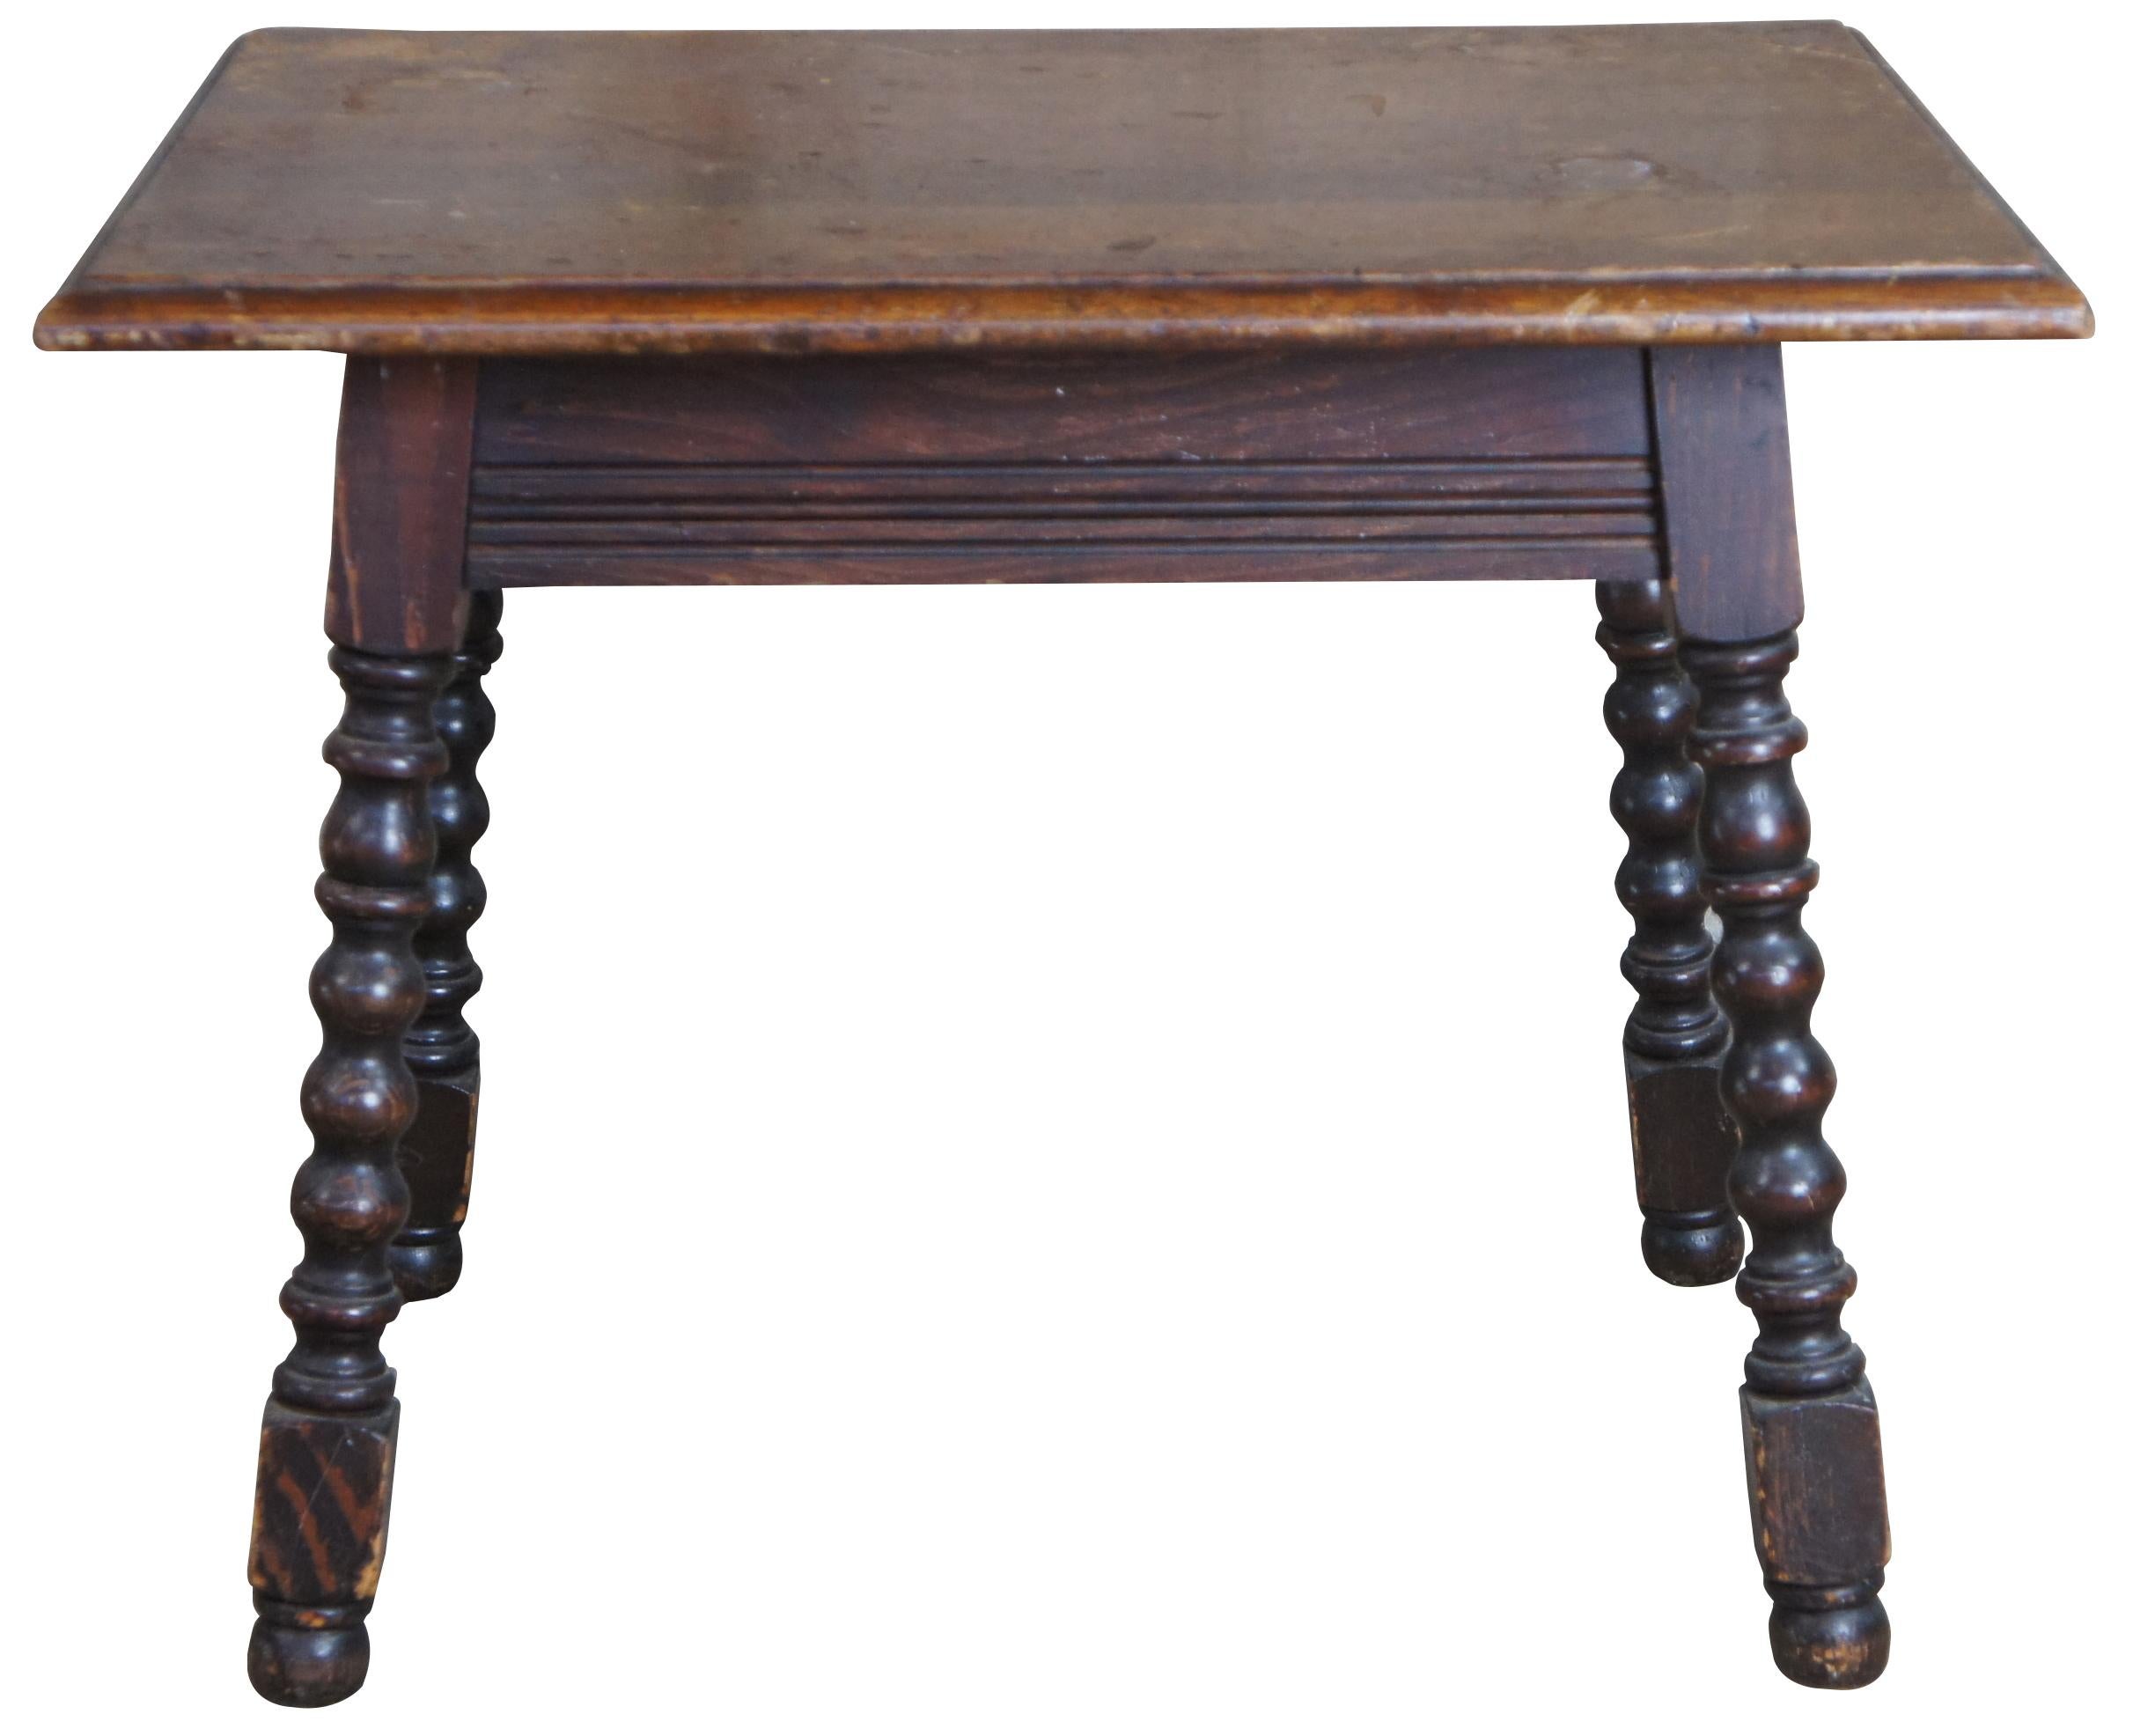 Early 20th century English oak side/end table. Rectangular form with beveled edge, fluted apron, spool turned legs and bun feet. 
 